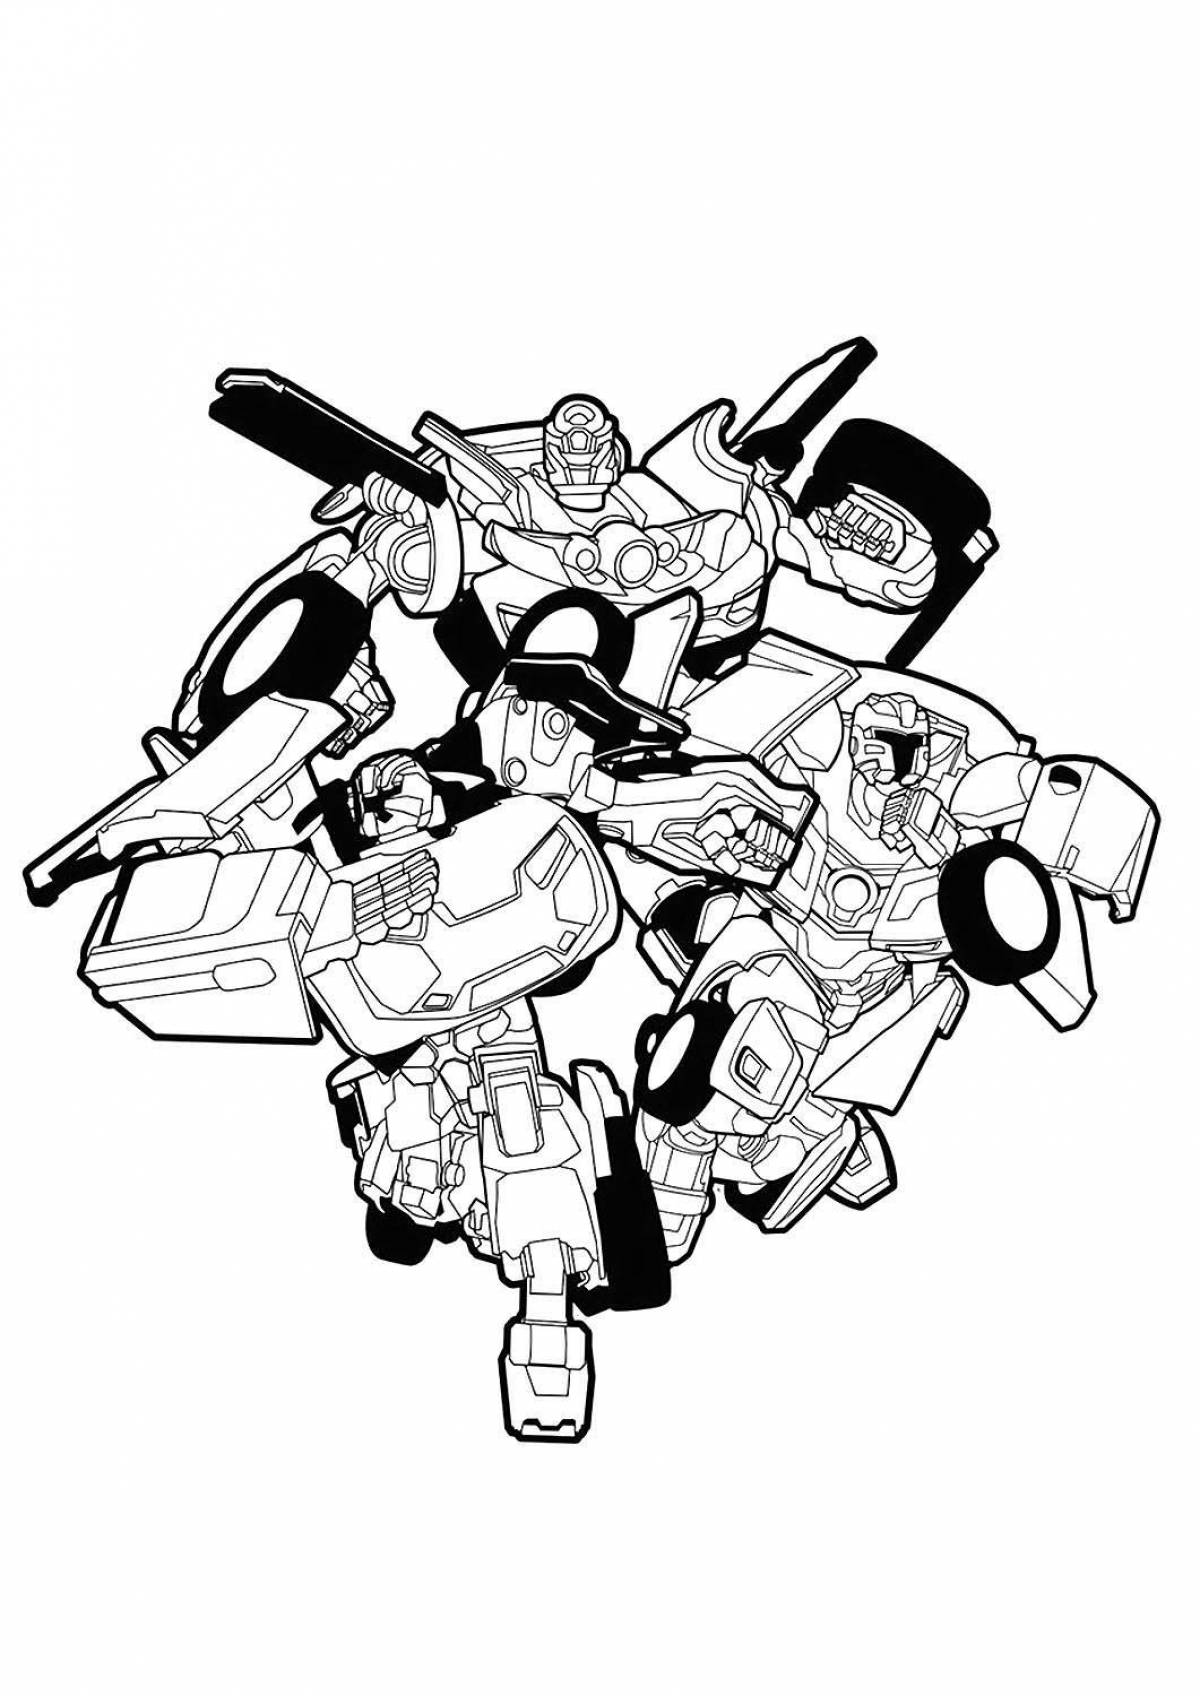 Adorable tobot coloring page